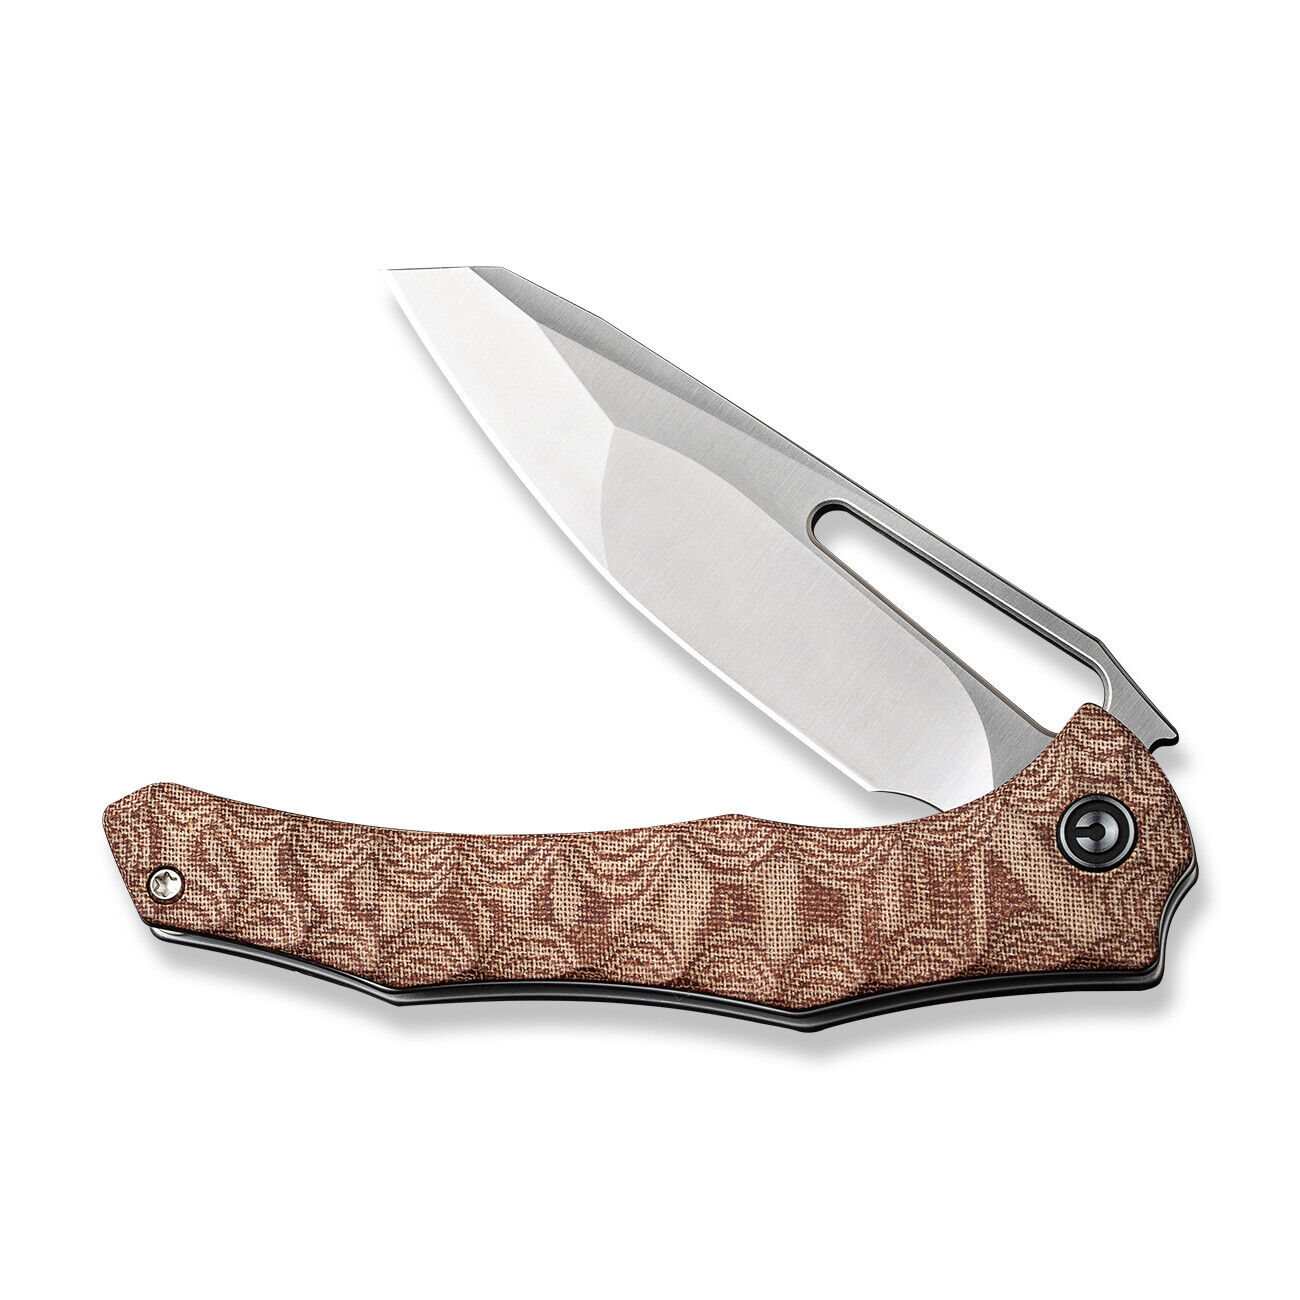 Civivi Knives Spiny Dogfish C22006-4 Brown Micarta 14C28N Stainless Pocket Knife